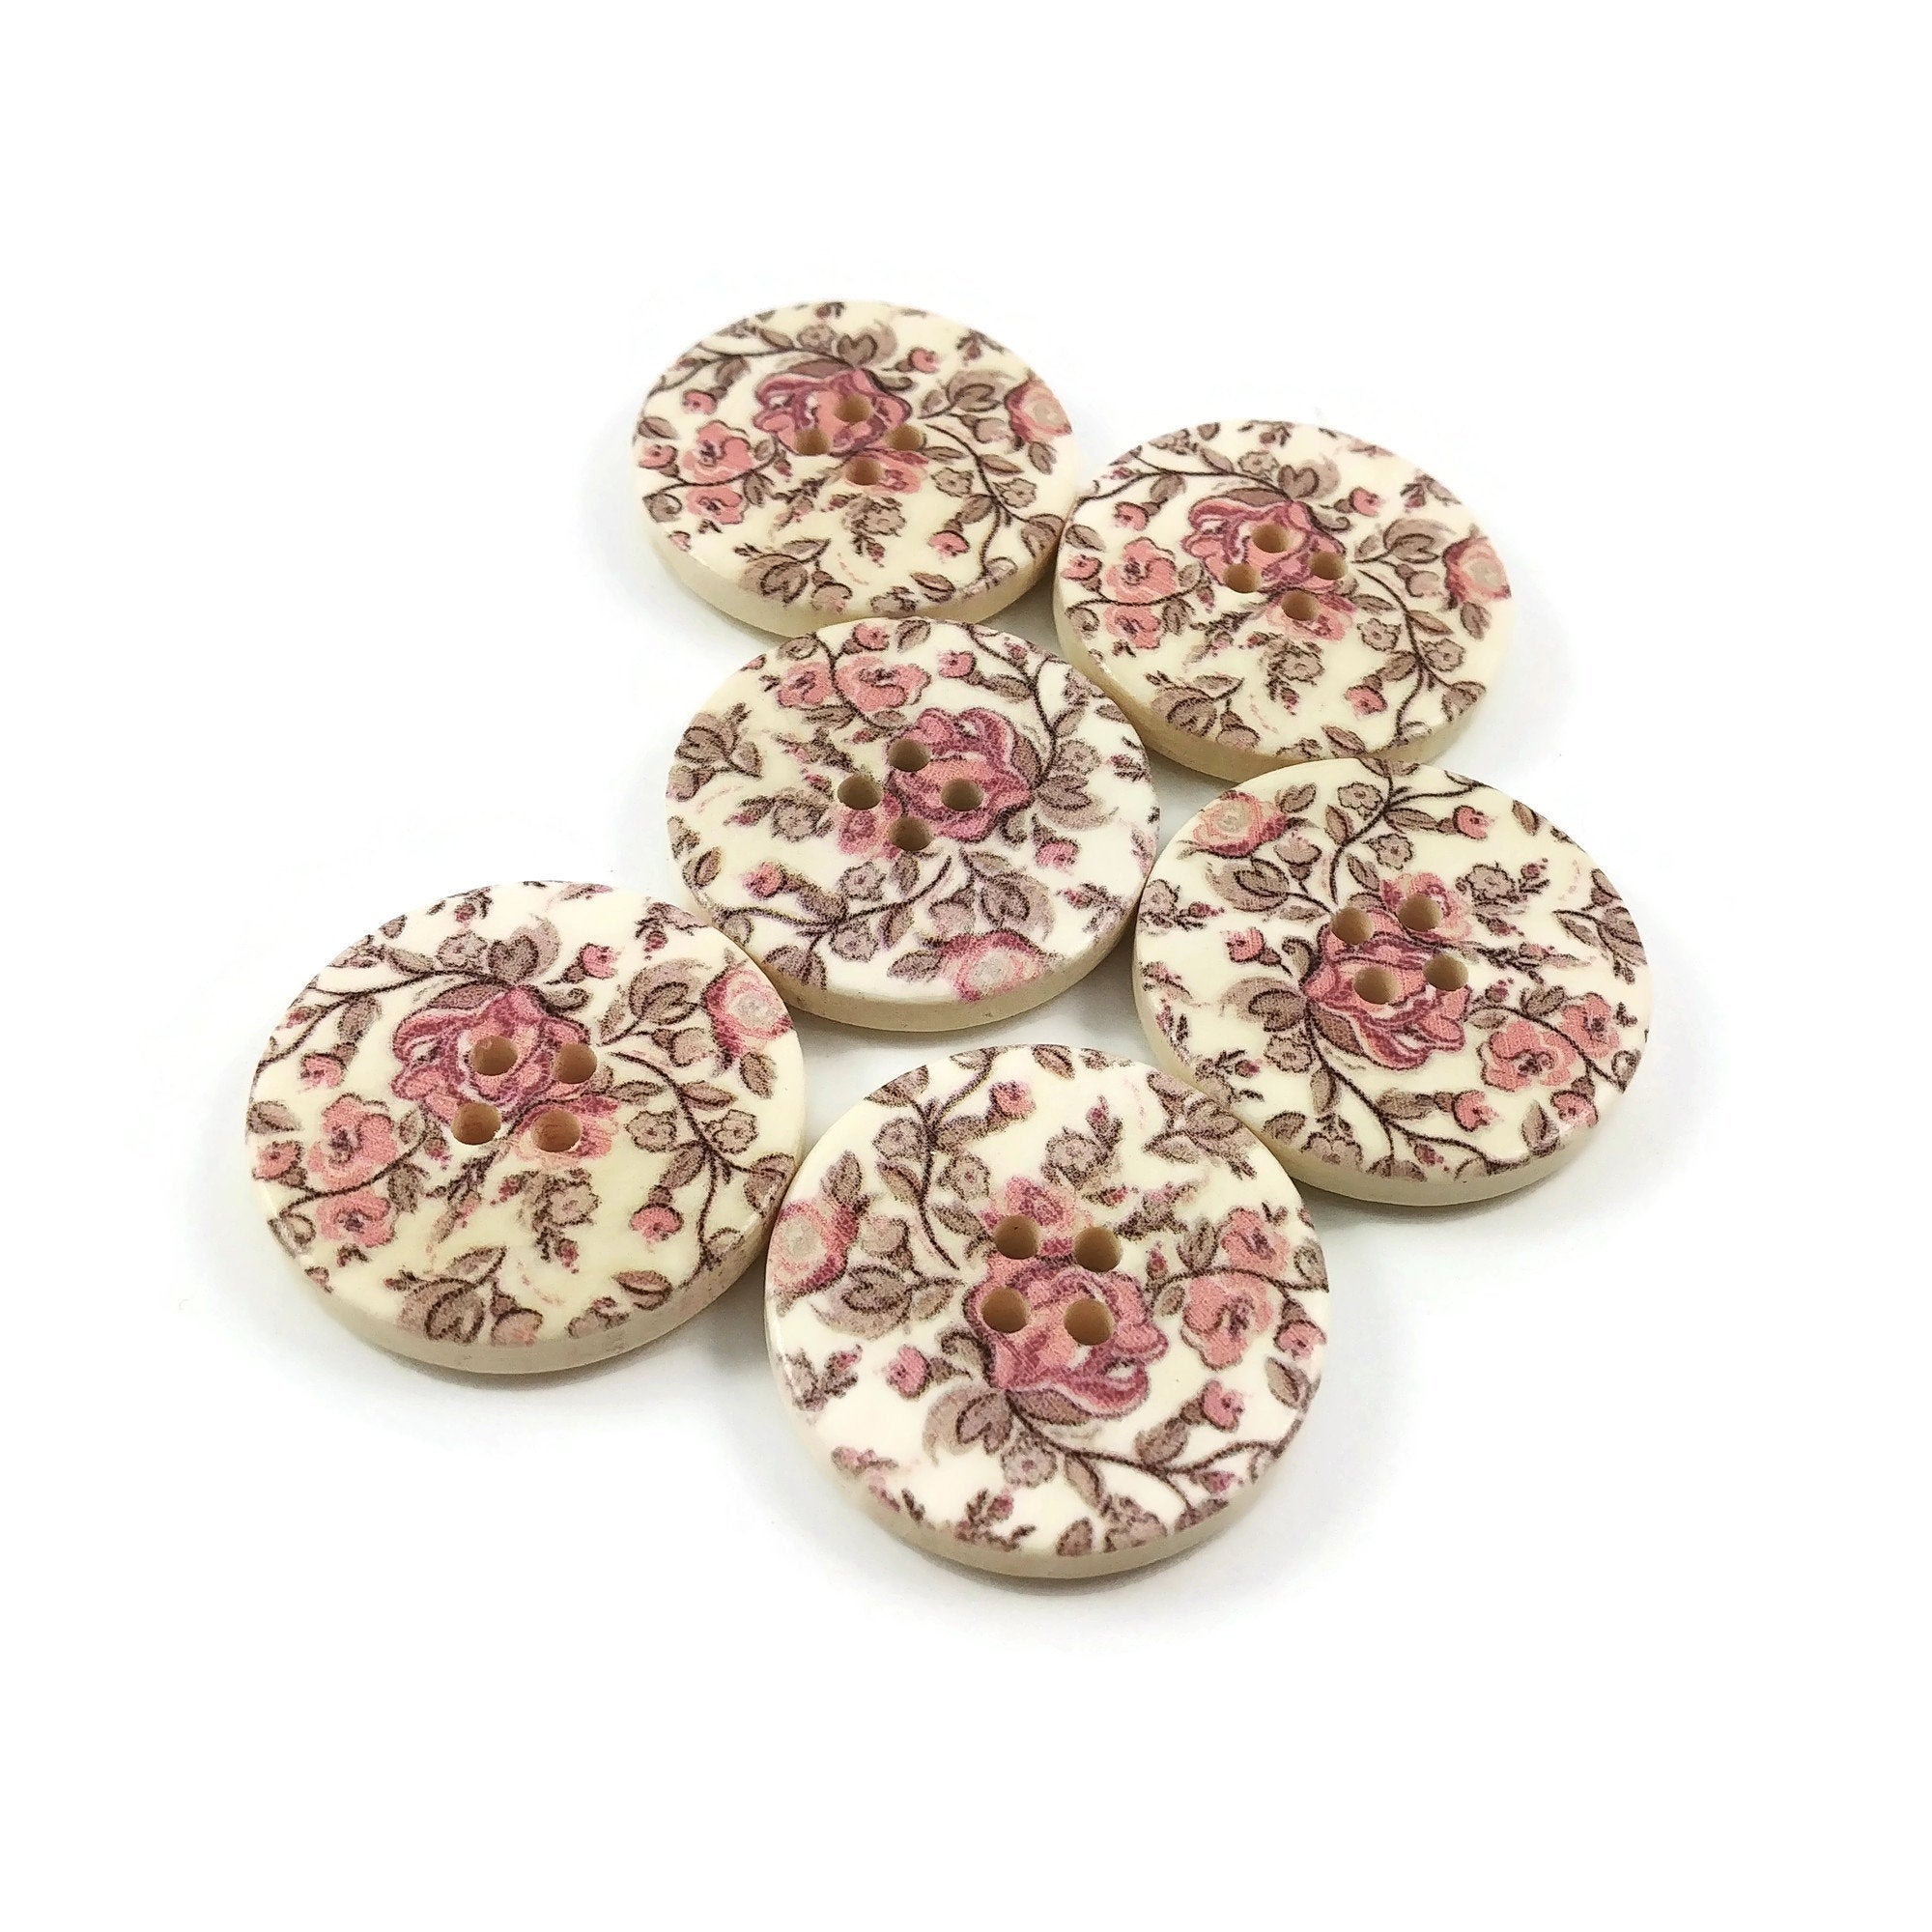 6 & 8pc Packs 13-23mm Flower & Plain Wooden Buttons for Sewing, Arts &  Crafts